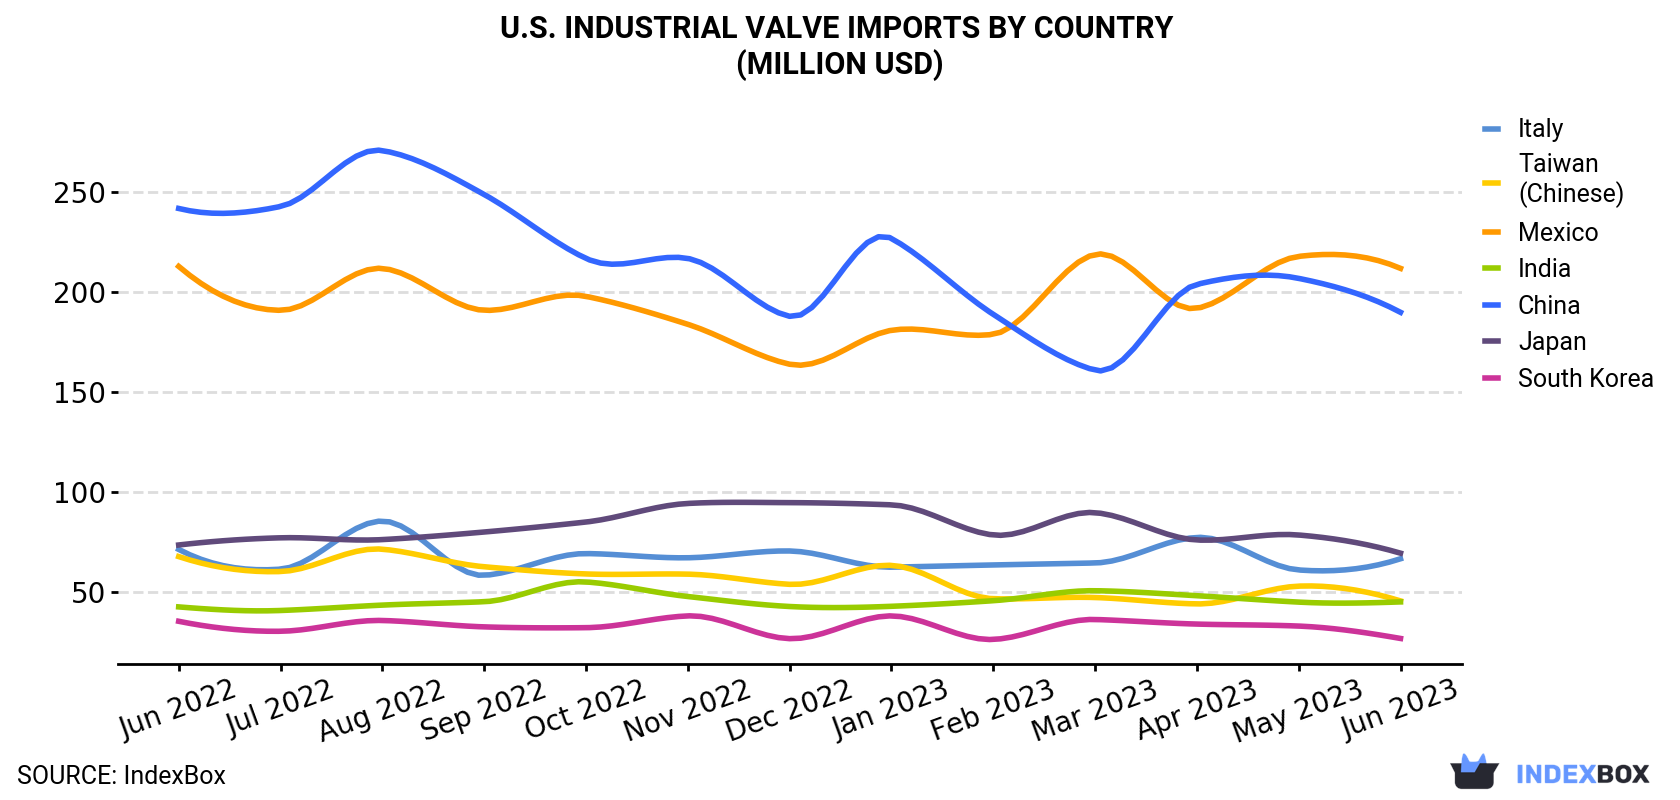 U.S. Industrial Valve Imports By Country (Million USD)